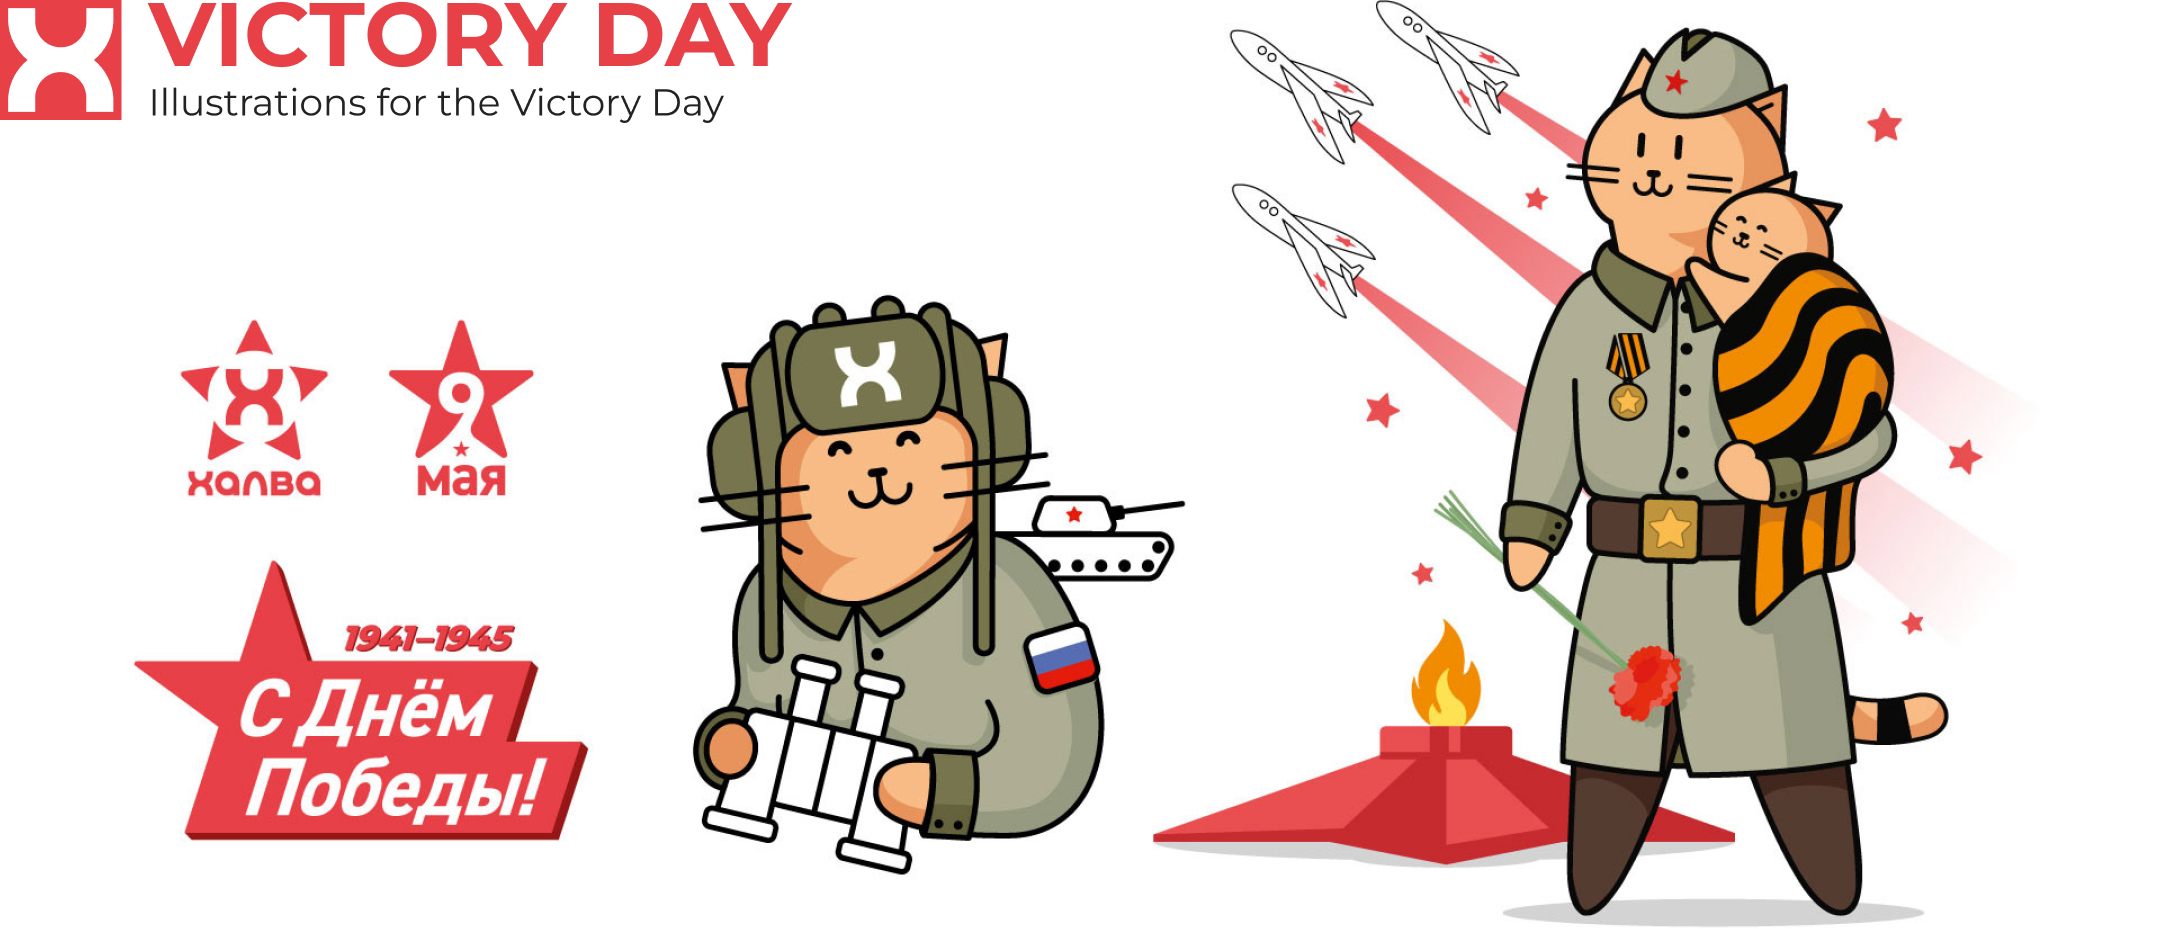 Victory Day: Illustrations for Victory day